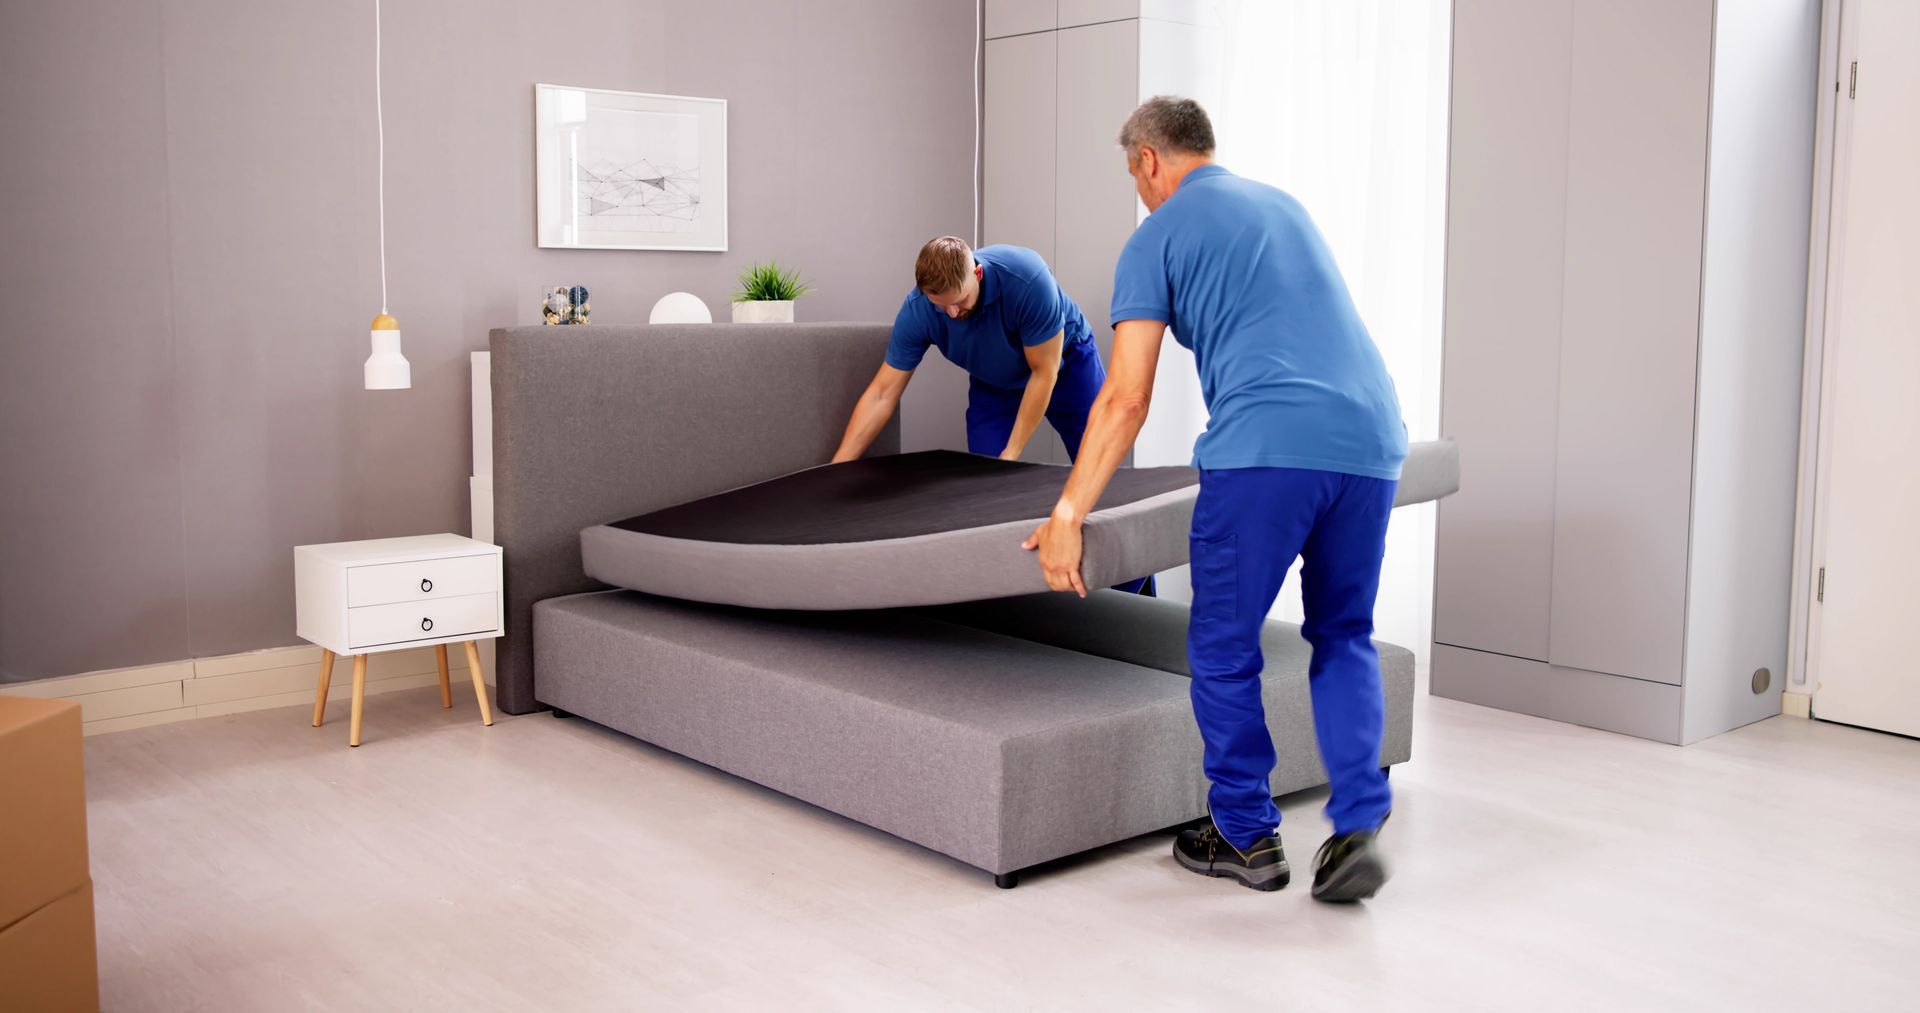 Two men are working on a bed in a bedroom.